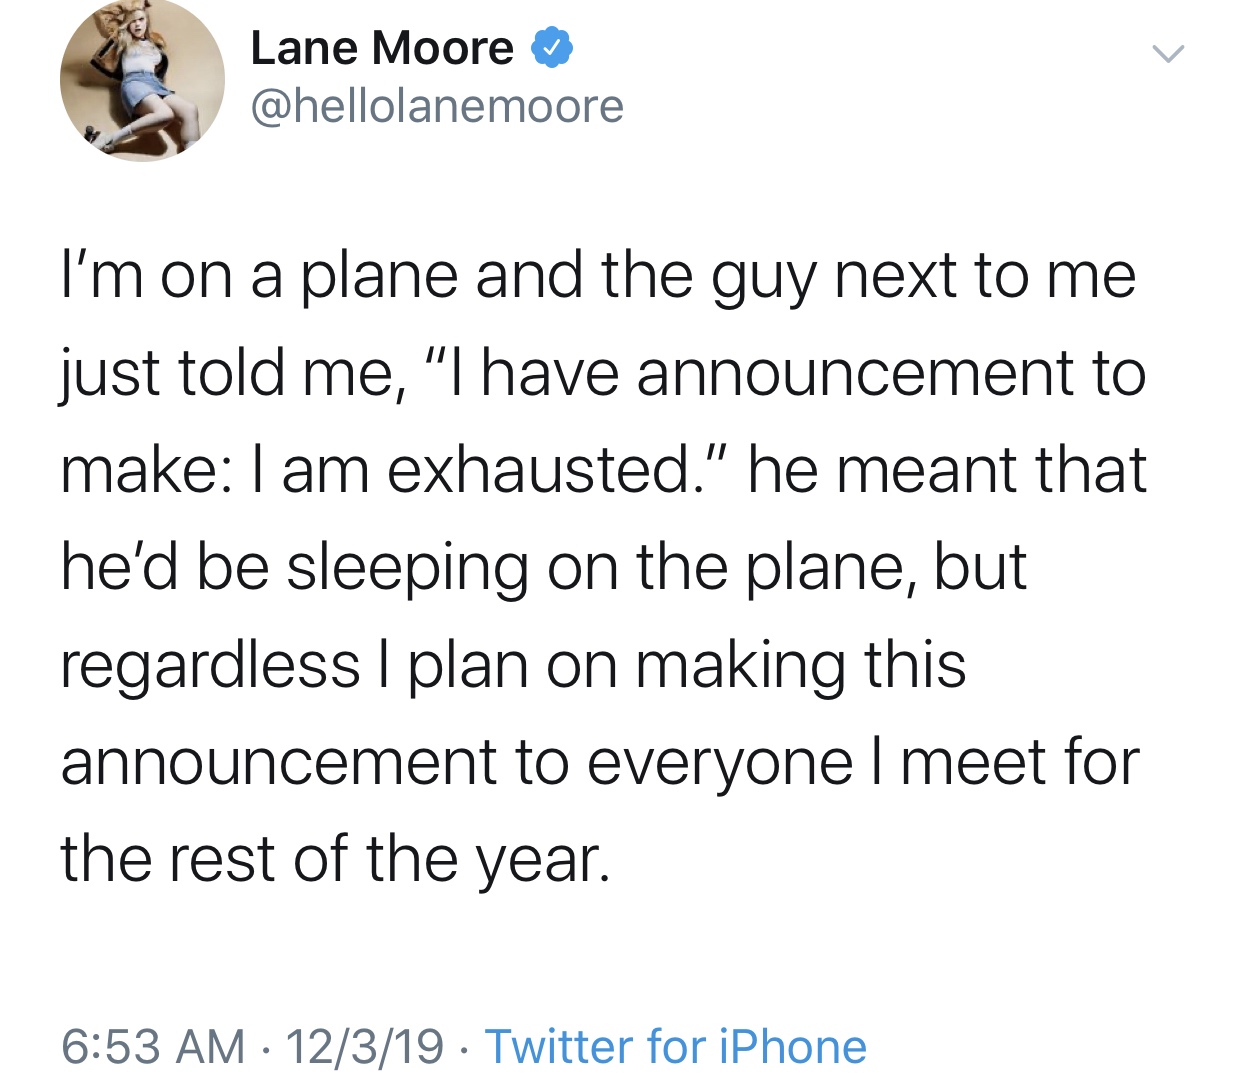 if you really love your children get - Lane Moore I'm on a plane and the guy next to me just told me, "I have announcement to make I am exhausted." he meant that he'd be sleeping on the plane, but regardless I plan on making this announcement to everyonel